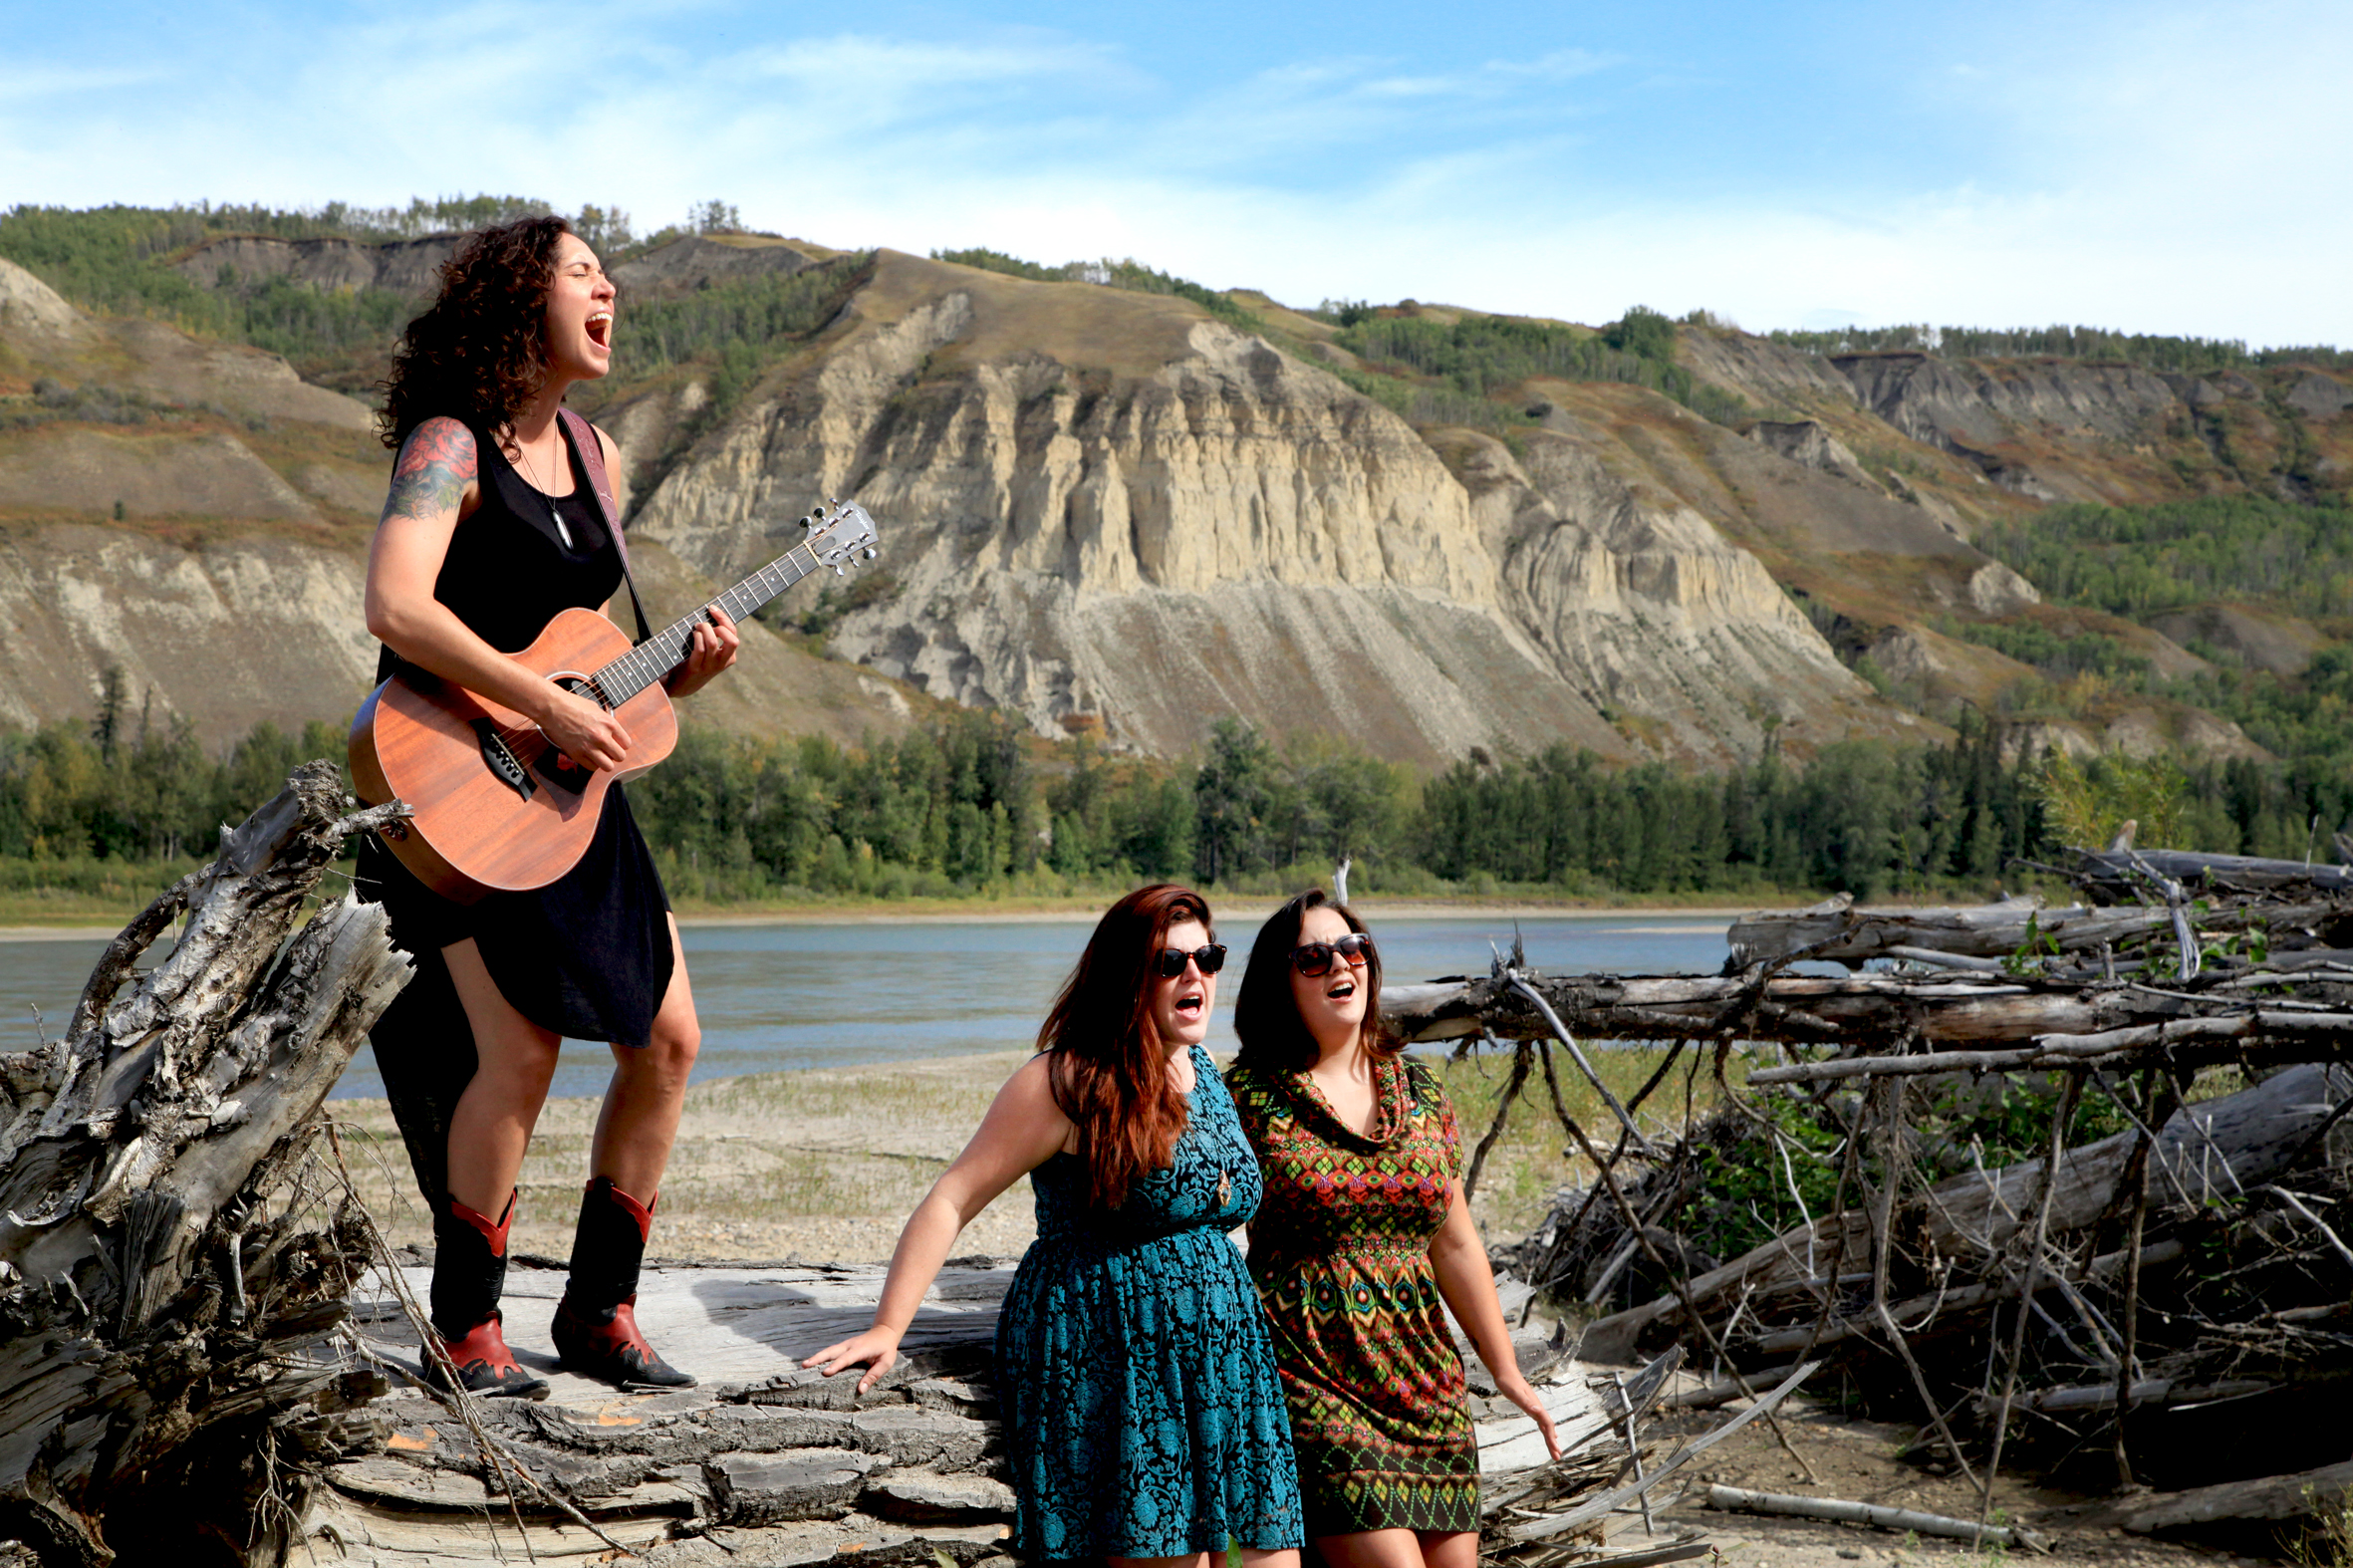 Miss Quincy & Twin Peaks recording '16 Horses' on the banks of the Peace River